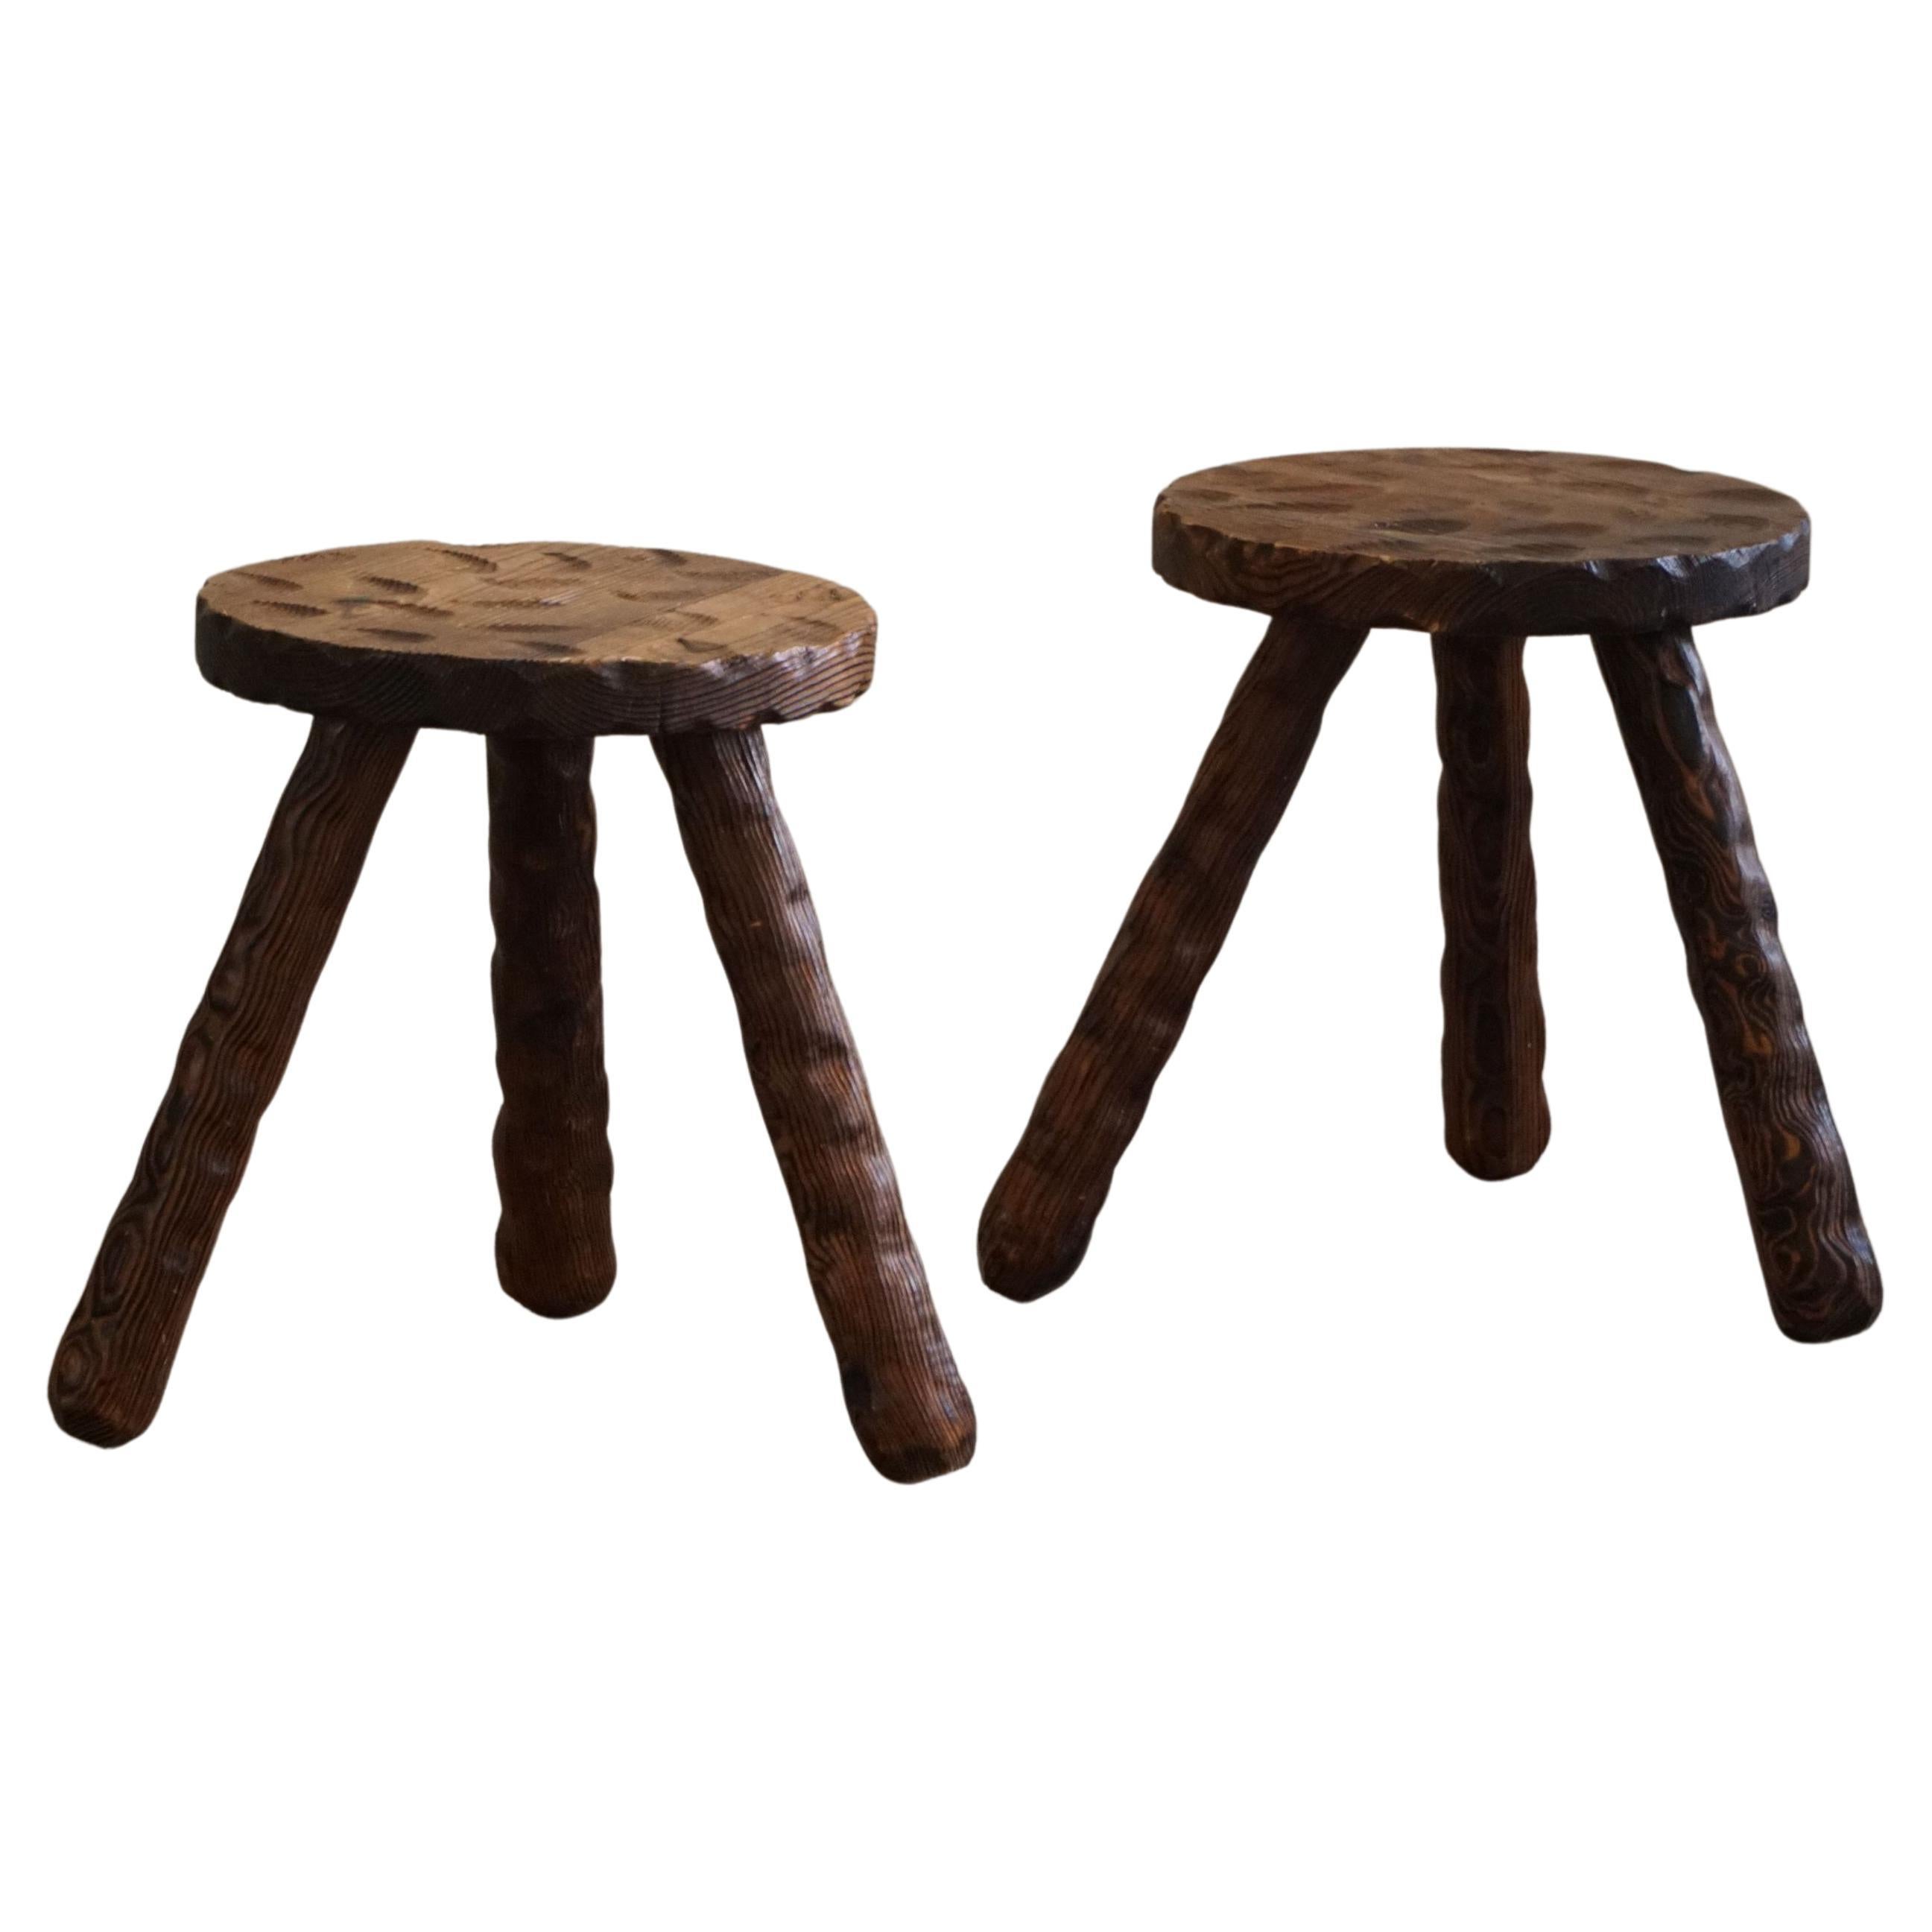 A Pair of Carved Wabi Sabi Stools in Pine, Swedish Mid Century Modern, 1960s For Sale